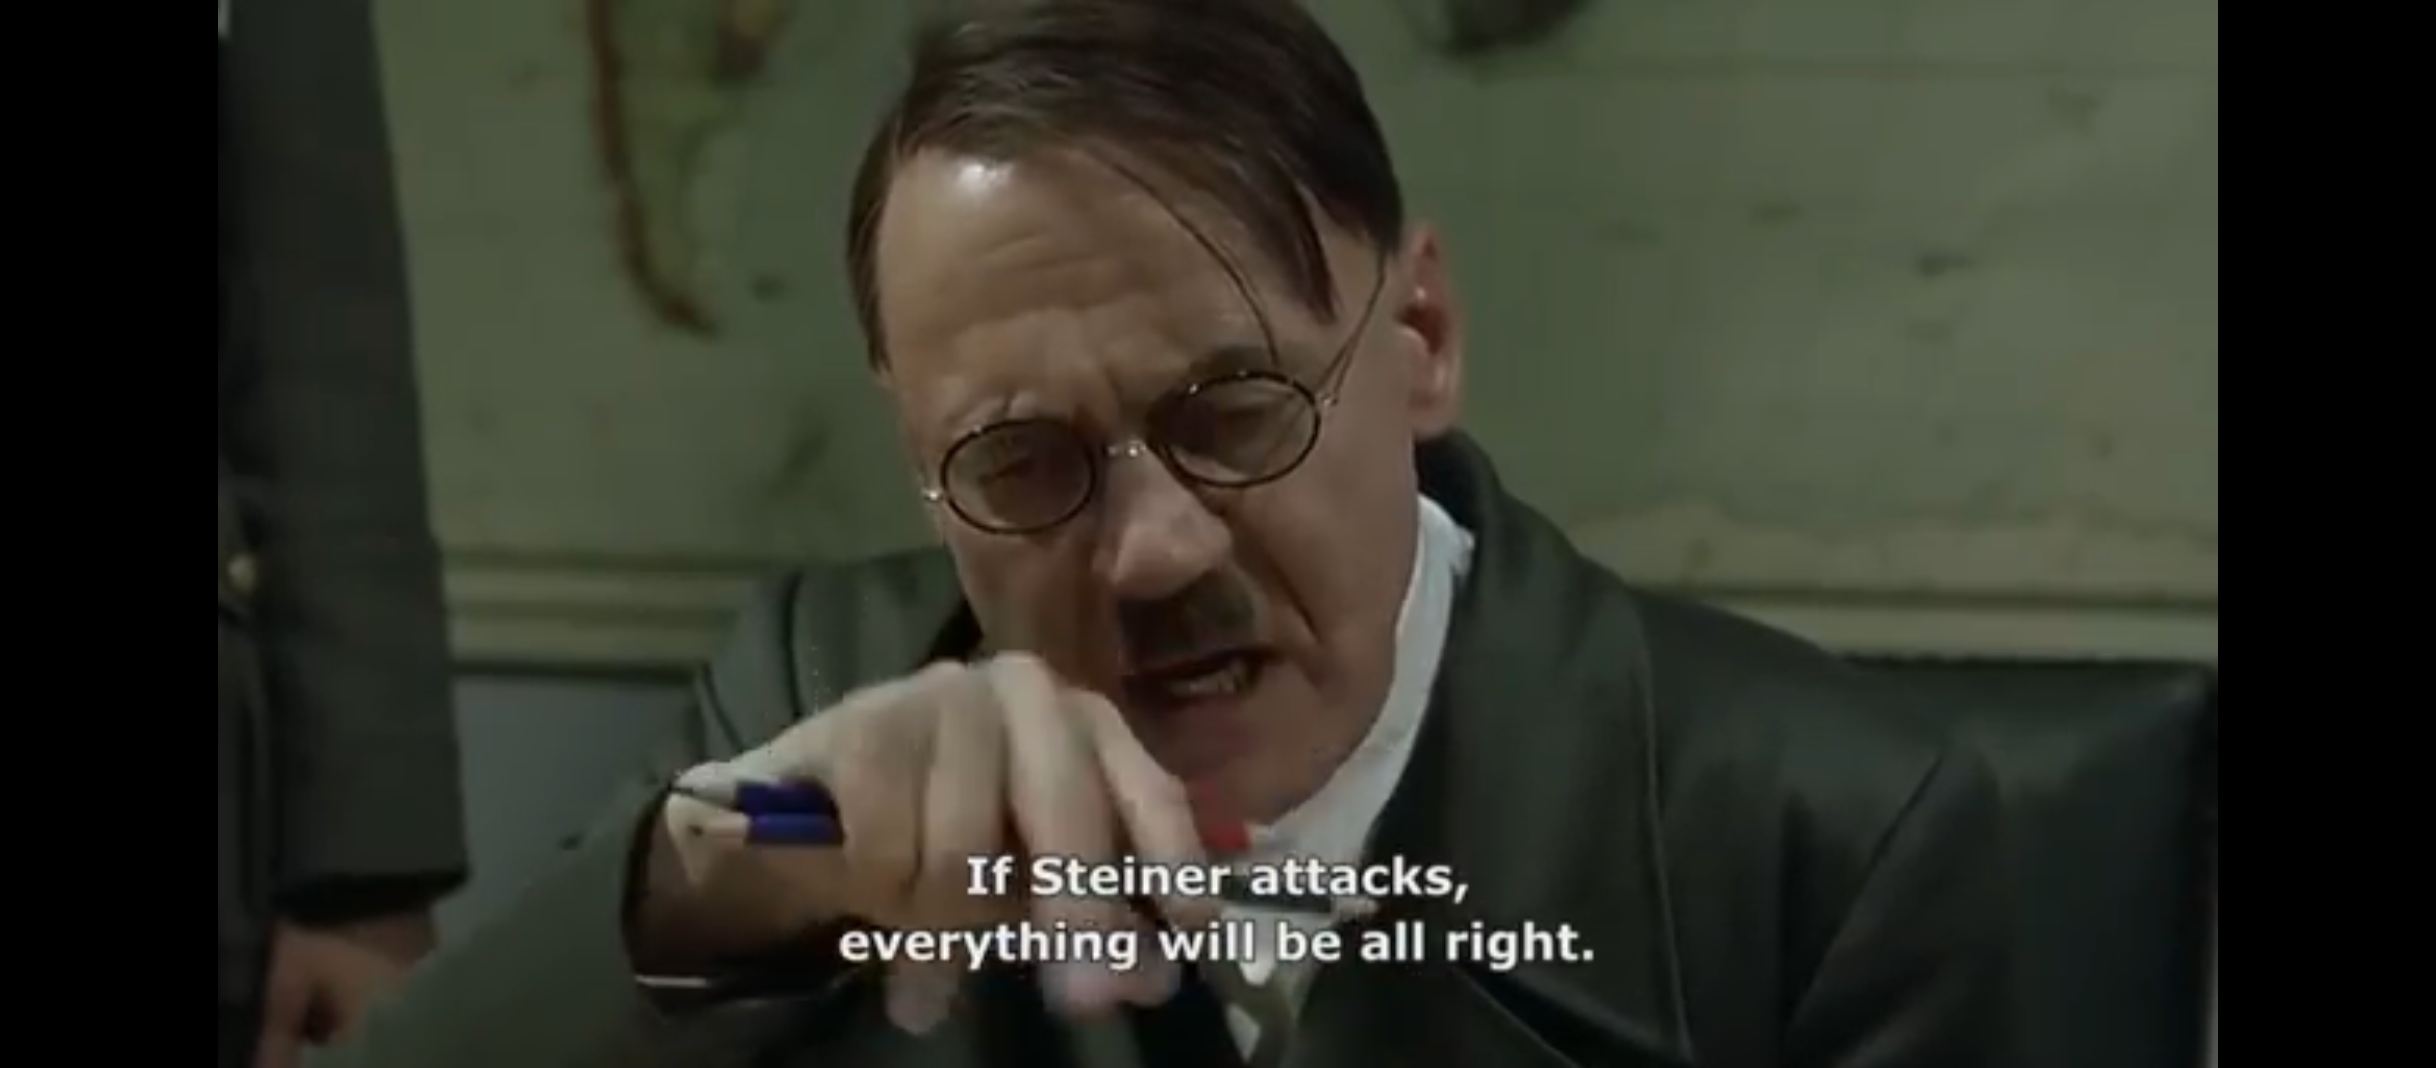 High Quality Angriff Steiners - Der Untergang Blank Meme Template